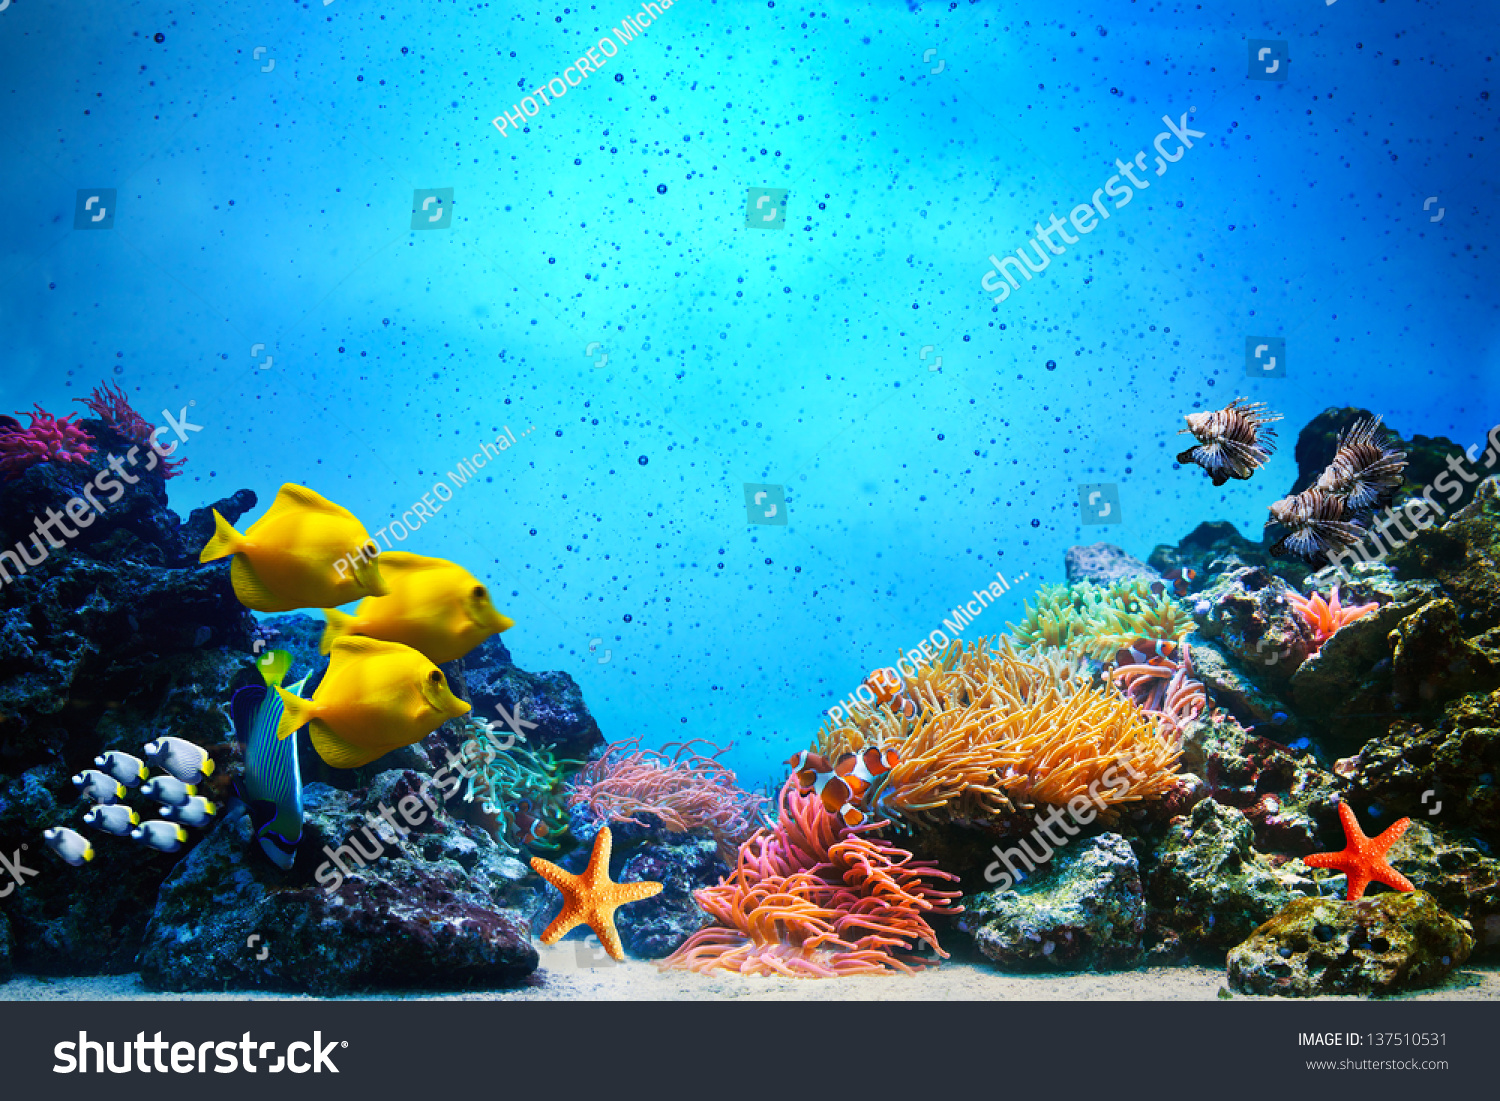 Underwater scene. Coral reef, colorful fish groups and sunny sky shining through clean ocean water. Space underwater for you to fill or just use standalone. High res #137510531